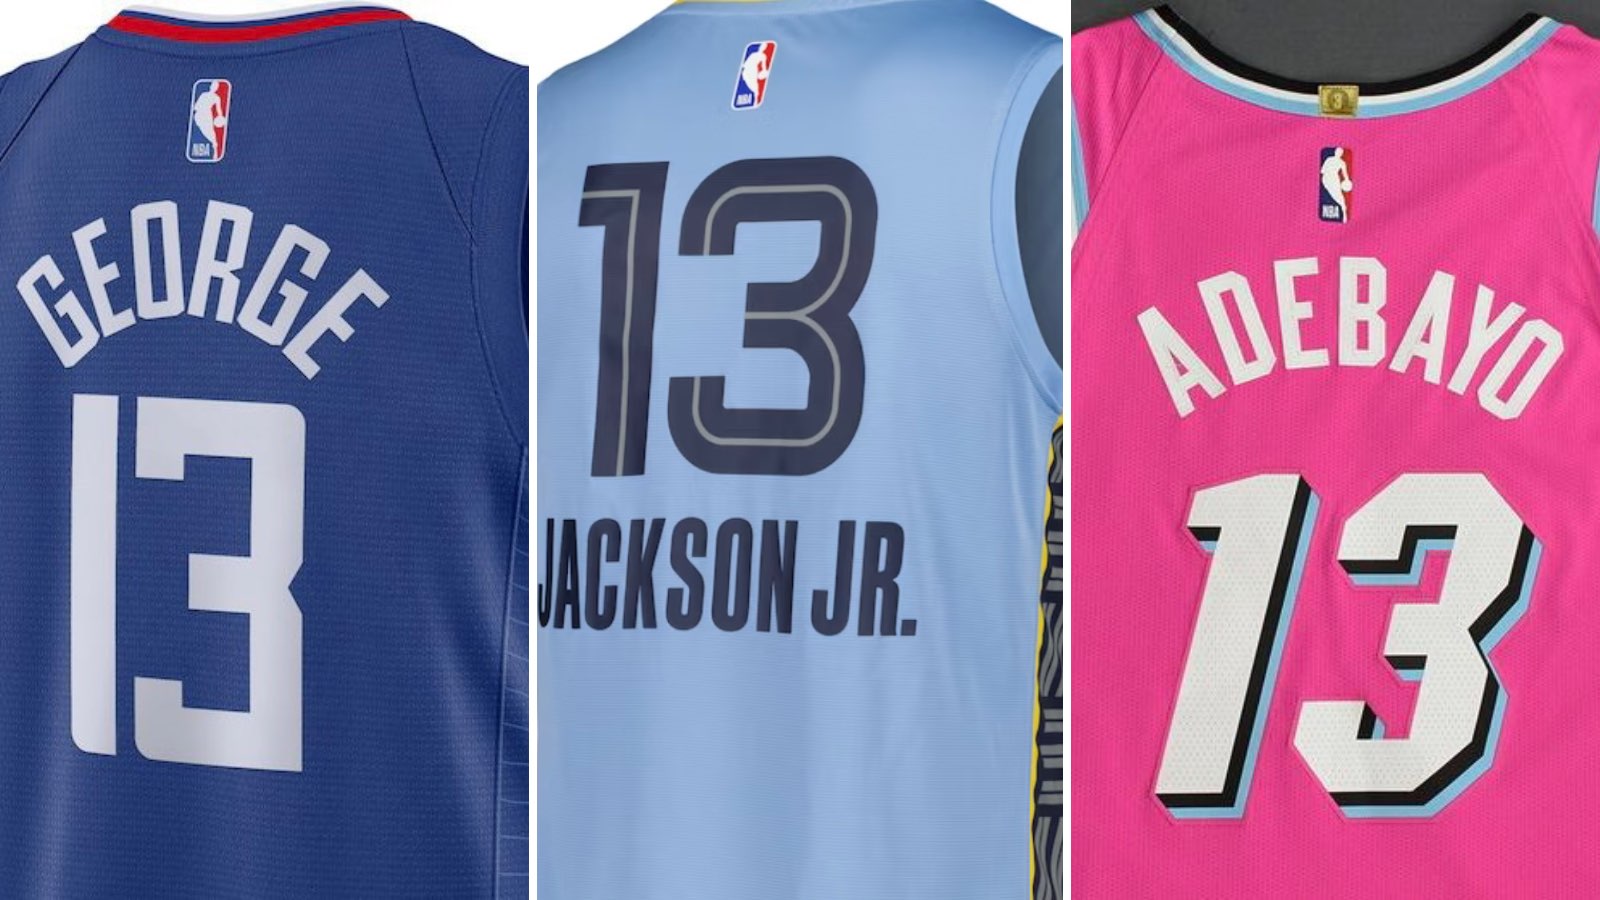 NBA 24/7 - Fun fact: there are 11 jersey numbers that have